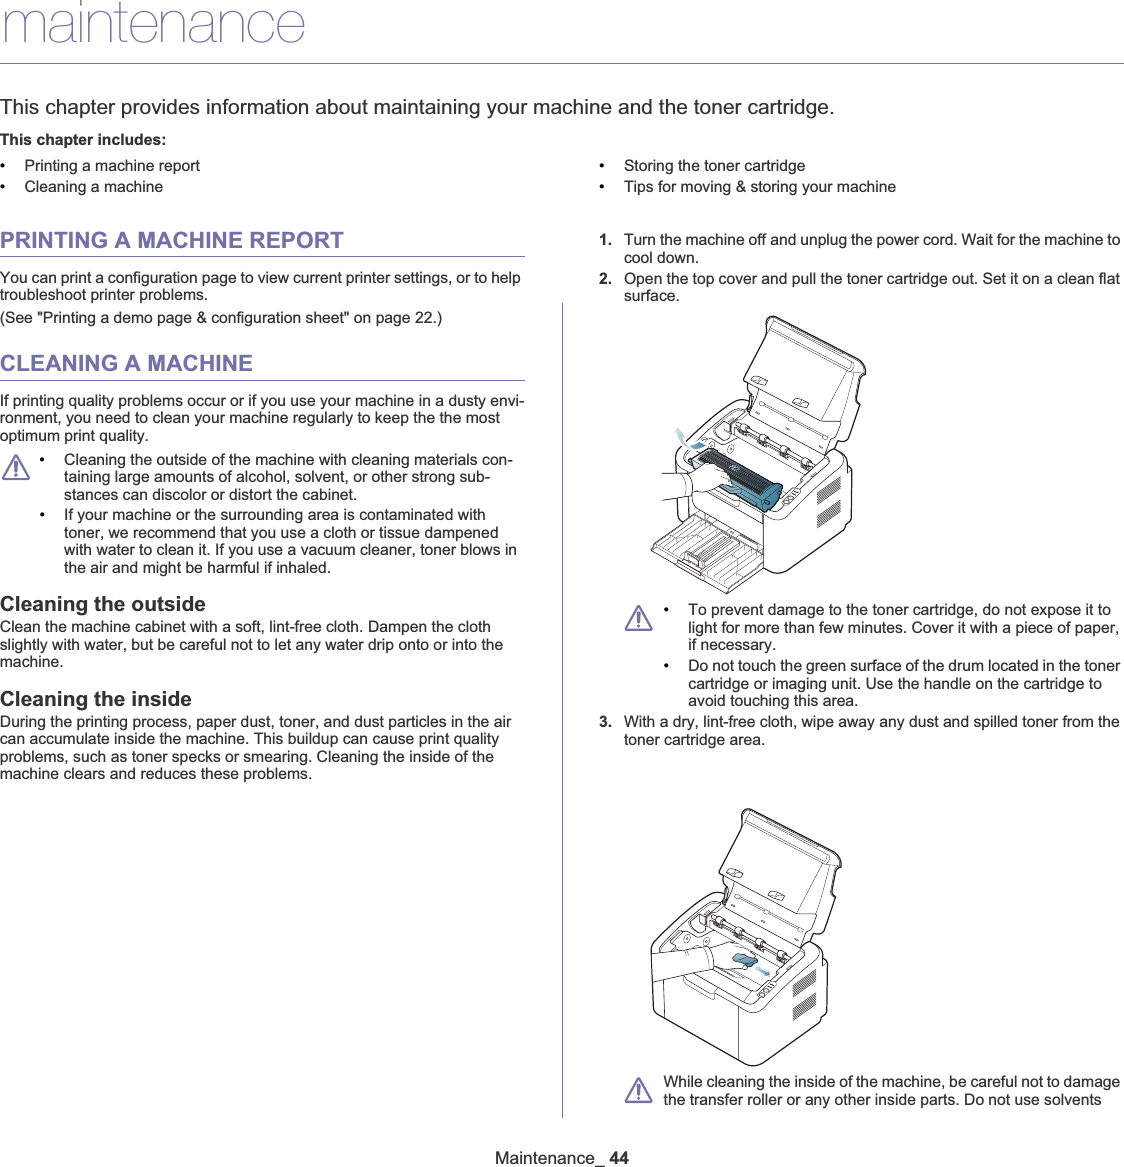 Maintenance_ 447.maintenanceThis chapter provides information about maintaining your machine and the toner cartridge.This chapter includes:•Printing a machine report•Cleaning a machine•Storing the toner cartridge•Tips for moving &amp; storing your machinePRINTING A MACHINE REPORTYou can print a configuration page to view current printer settings, or to help troubleshoot printer problems. (See &quot;Printing a demo page &amp; configuration sheet&quot; on page 22.)CLEANING A MACHINEIf printing quality problems occur or if you use your machine in a dusty envi-ronment, you need to clean your machine regularly to keep the the most optimum print quality.•Cleaning the outside of the machine with cleaning materials con-taining large amounts of alcohol, solvent, or other strong sub-stances can discolor or distort the cabinet. •If your machine or the surrounding area is contaminated with toner, we recommend that you use a cloth or tissue dampened with water to clean it. If you use a vacuum cleaner, toner blows in the air and might be harmful if inhaled.Cleaning the outsideClean the machine cabinet with a soft, lint-free cloth. Dampen the cloth slightly with water, but be careful not to let any water drip onto or into the machine.Cleaning the insideDuring the printing process, paper dust, toner, and dust particles in the air can accumulate inside the machine. This buildup can cause print quality problems, such as toner specks or smearing. Cleaning the inside of the machine clears and reduces these problems.1. Turn the machine offGand unplug the power cord. Wait for the machine to cool down.2. Open the top cover and pull the toner cartridge out. Set it on a clean flat surface.•To prevent damage to the toner cartridge, do not expose it to light for more than few minutes. Cover it with a piece of paper, if necessary. •Do not touch the green surface of the drum located in the toner cartridge or imaging unit. Use the handle on the cartridge to avoid touching this area.3. With a dry, lint-free cloth, wipe away any dust and spilled toner from the toner cartridge area.While cleaning the inside of the machine, be careful not to damage the transfer roller or any other inside parts. Do not use solvents 